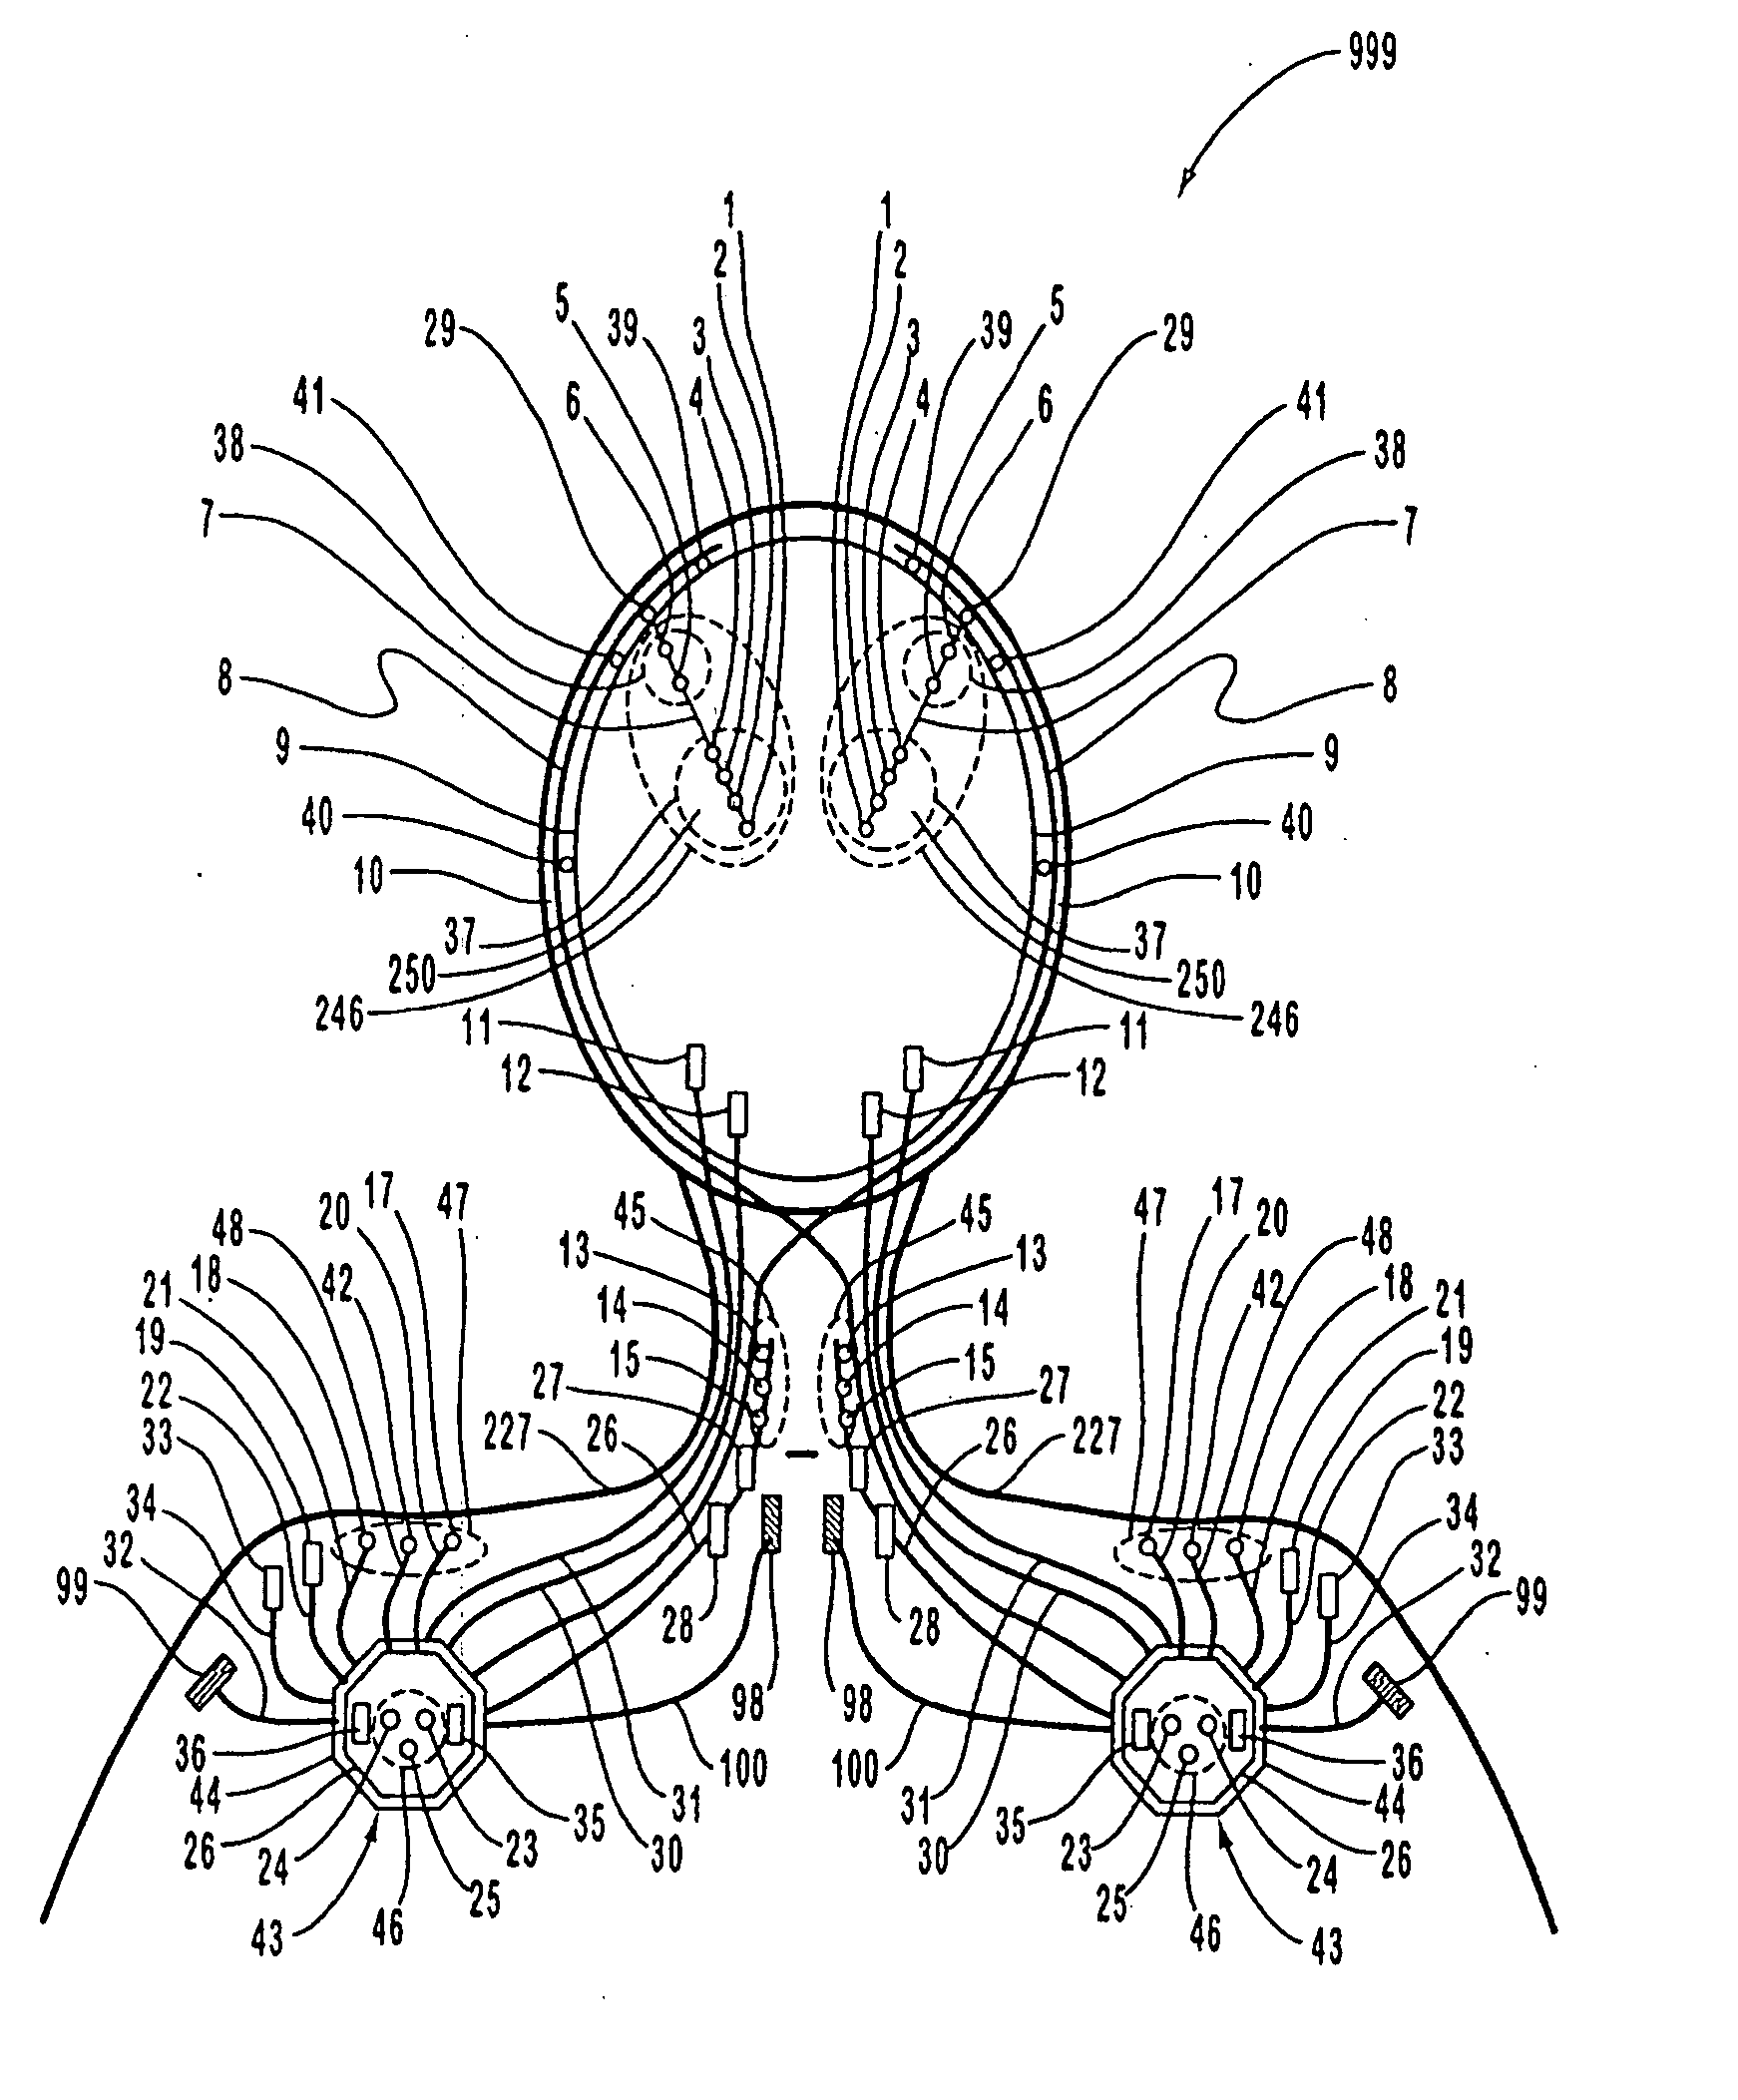 Apparatus and method for closed-loop intracranial stimulation for optimal control of neurological disease